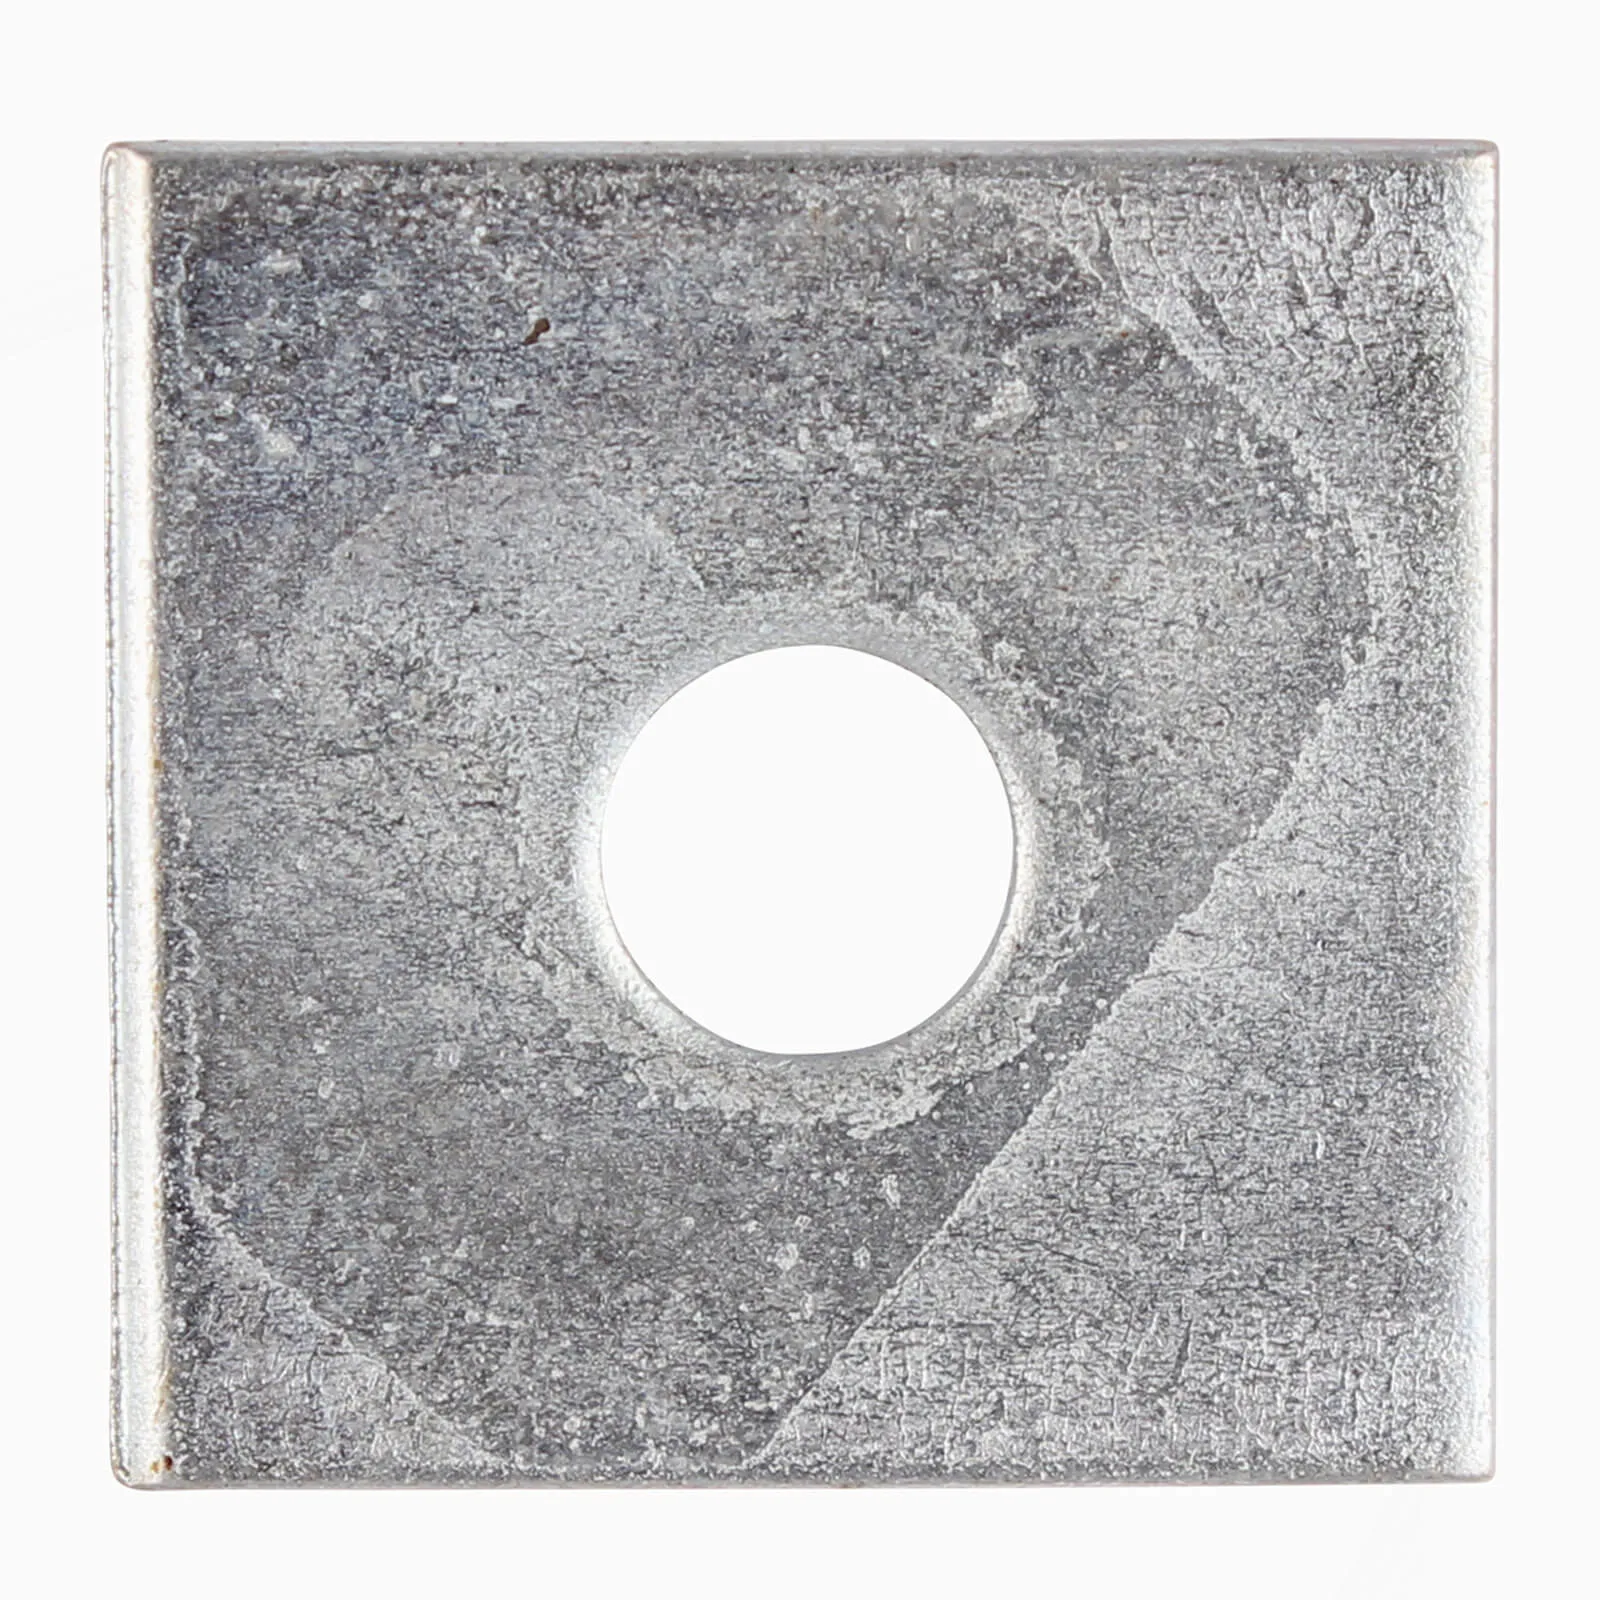 Square Plate Washer Zinc Plated - 10mm, 40mm, Pack of 150